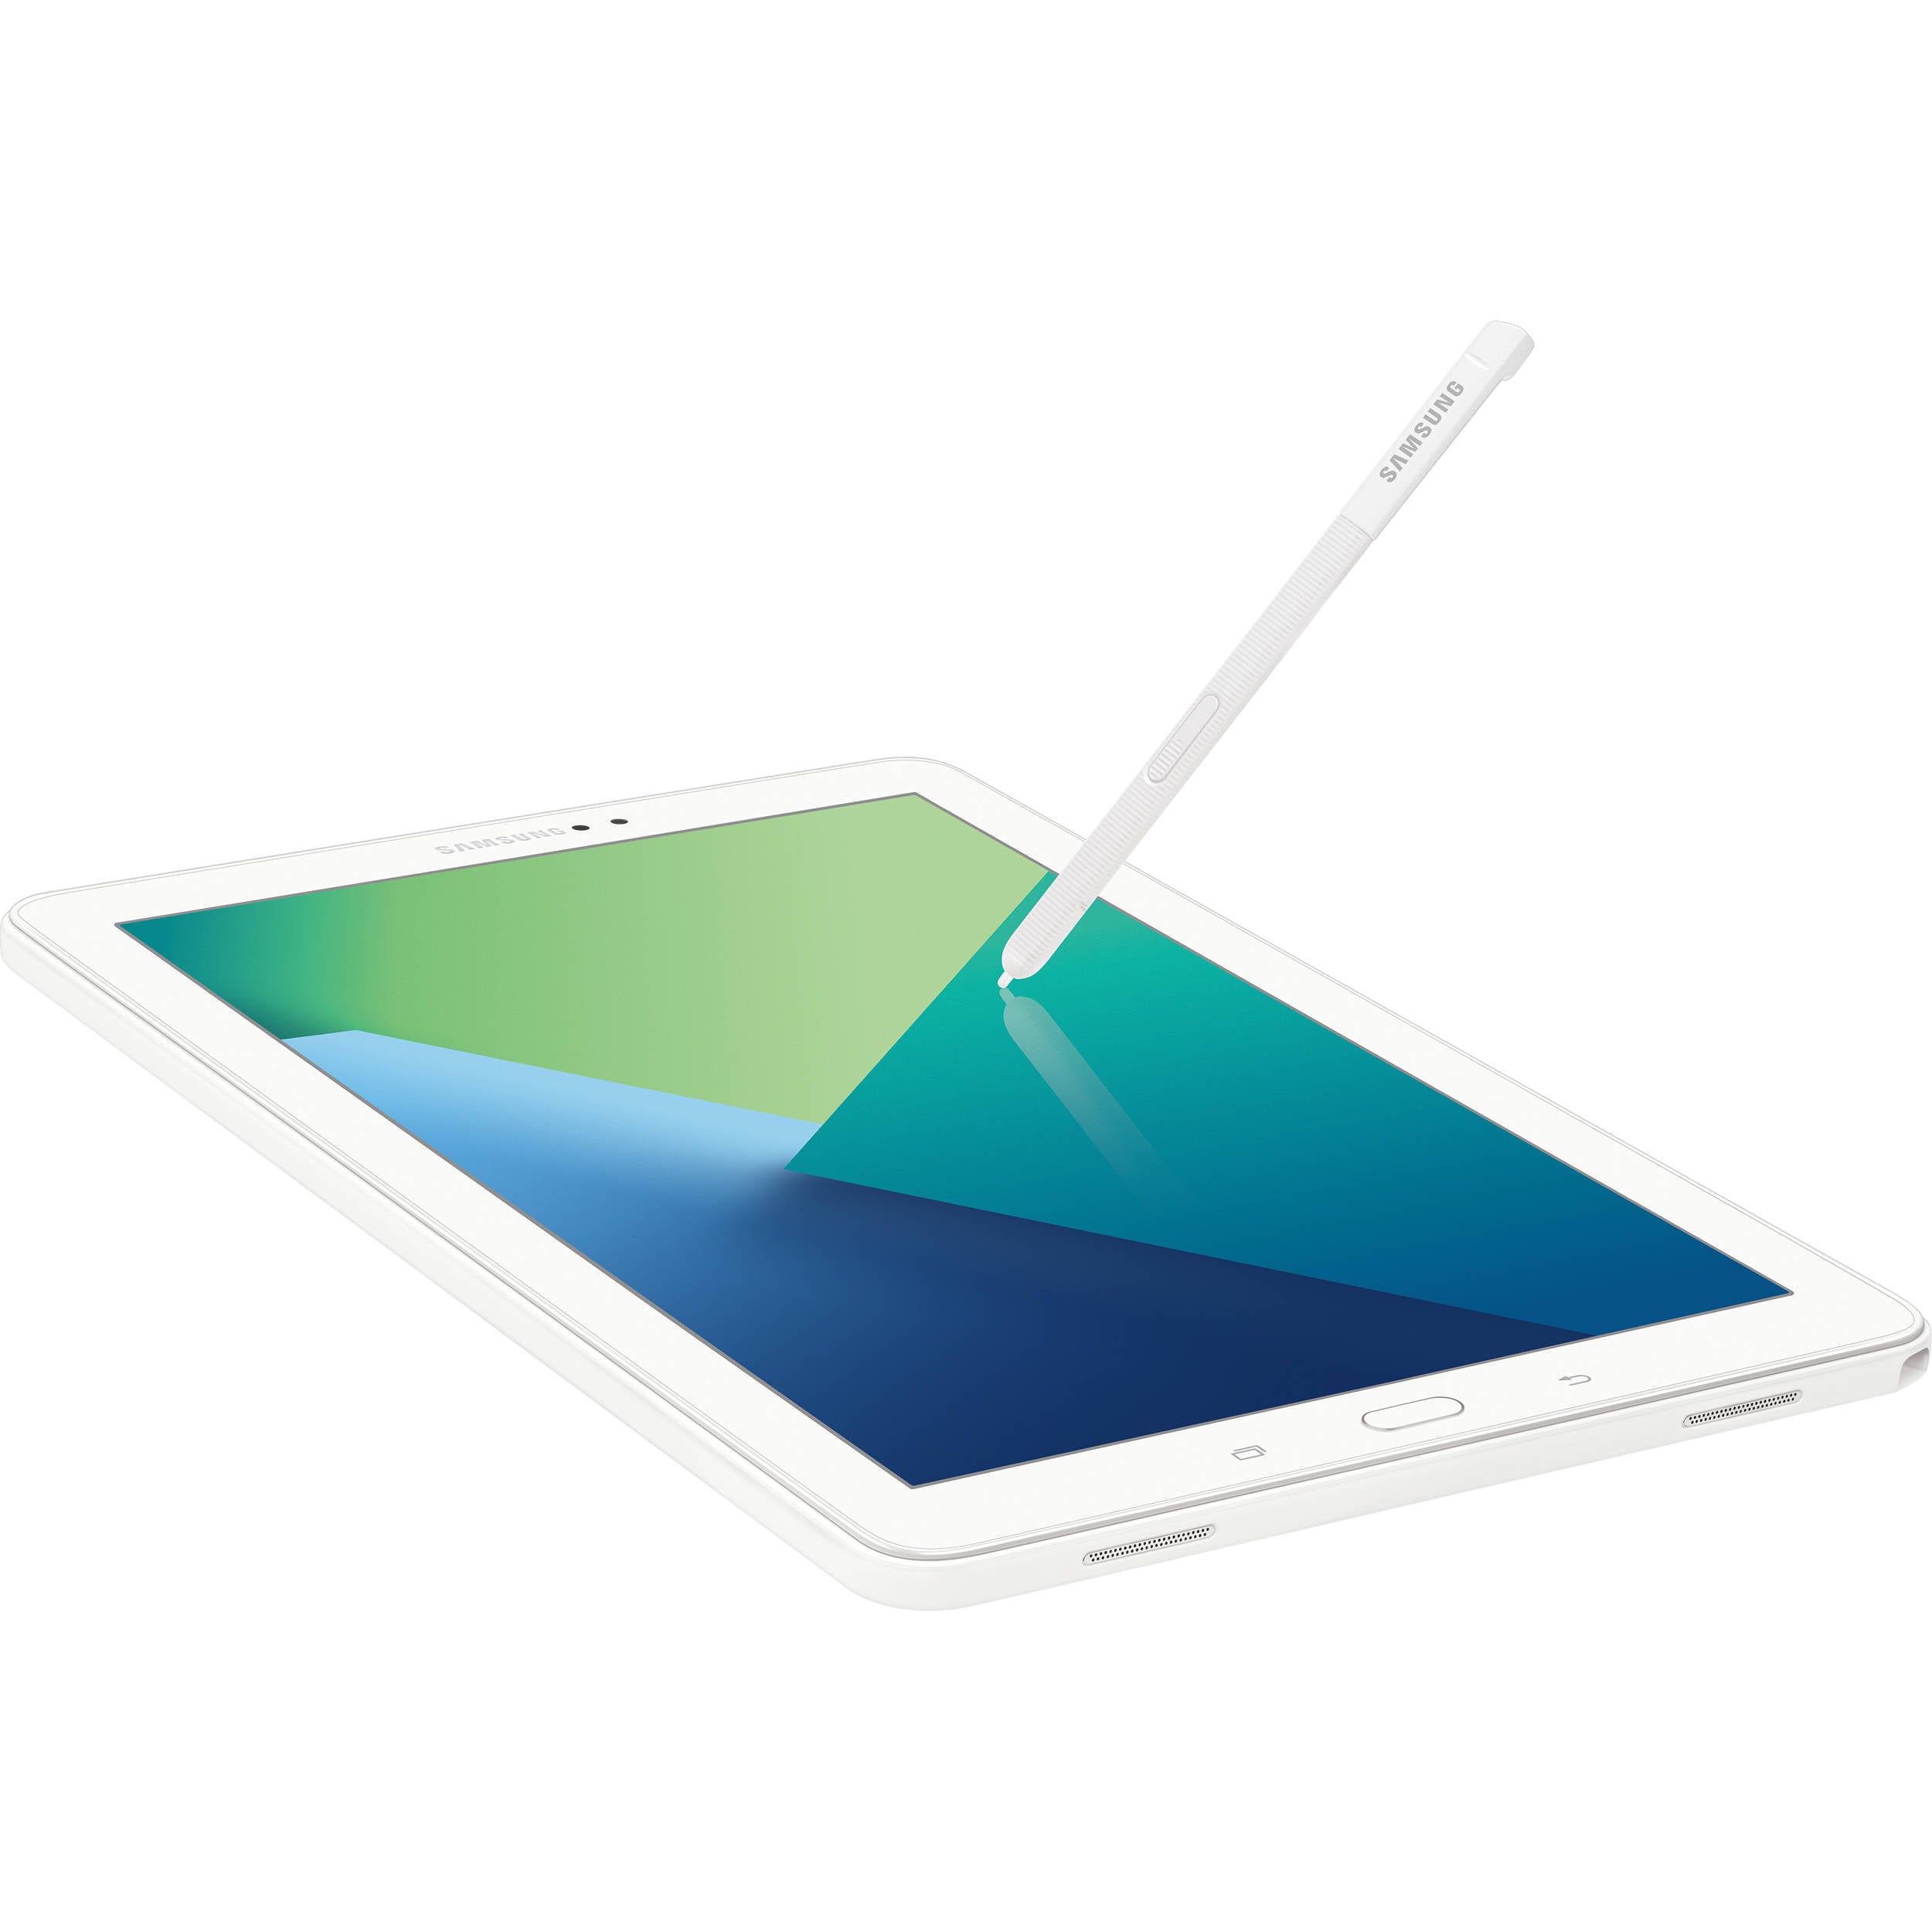 Samsung SM-P580NZWAXAR-RBC 10.1" Galaxy Tab A 16GB Wi-Fi Android Tablet White - Certified Refurbished